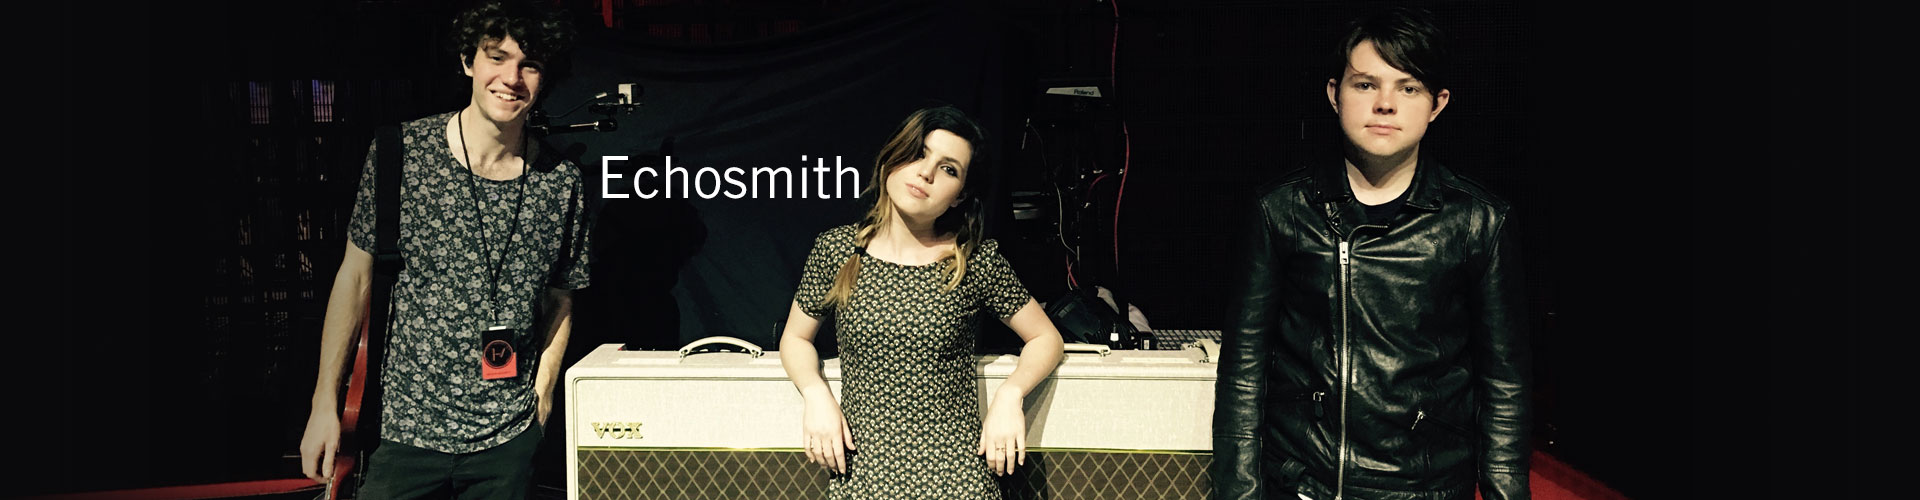 band members of Echosmith standing in front of VOX amplifiers